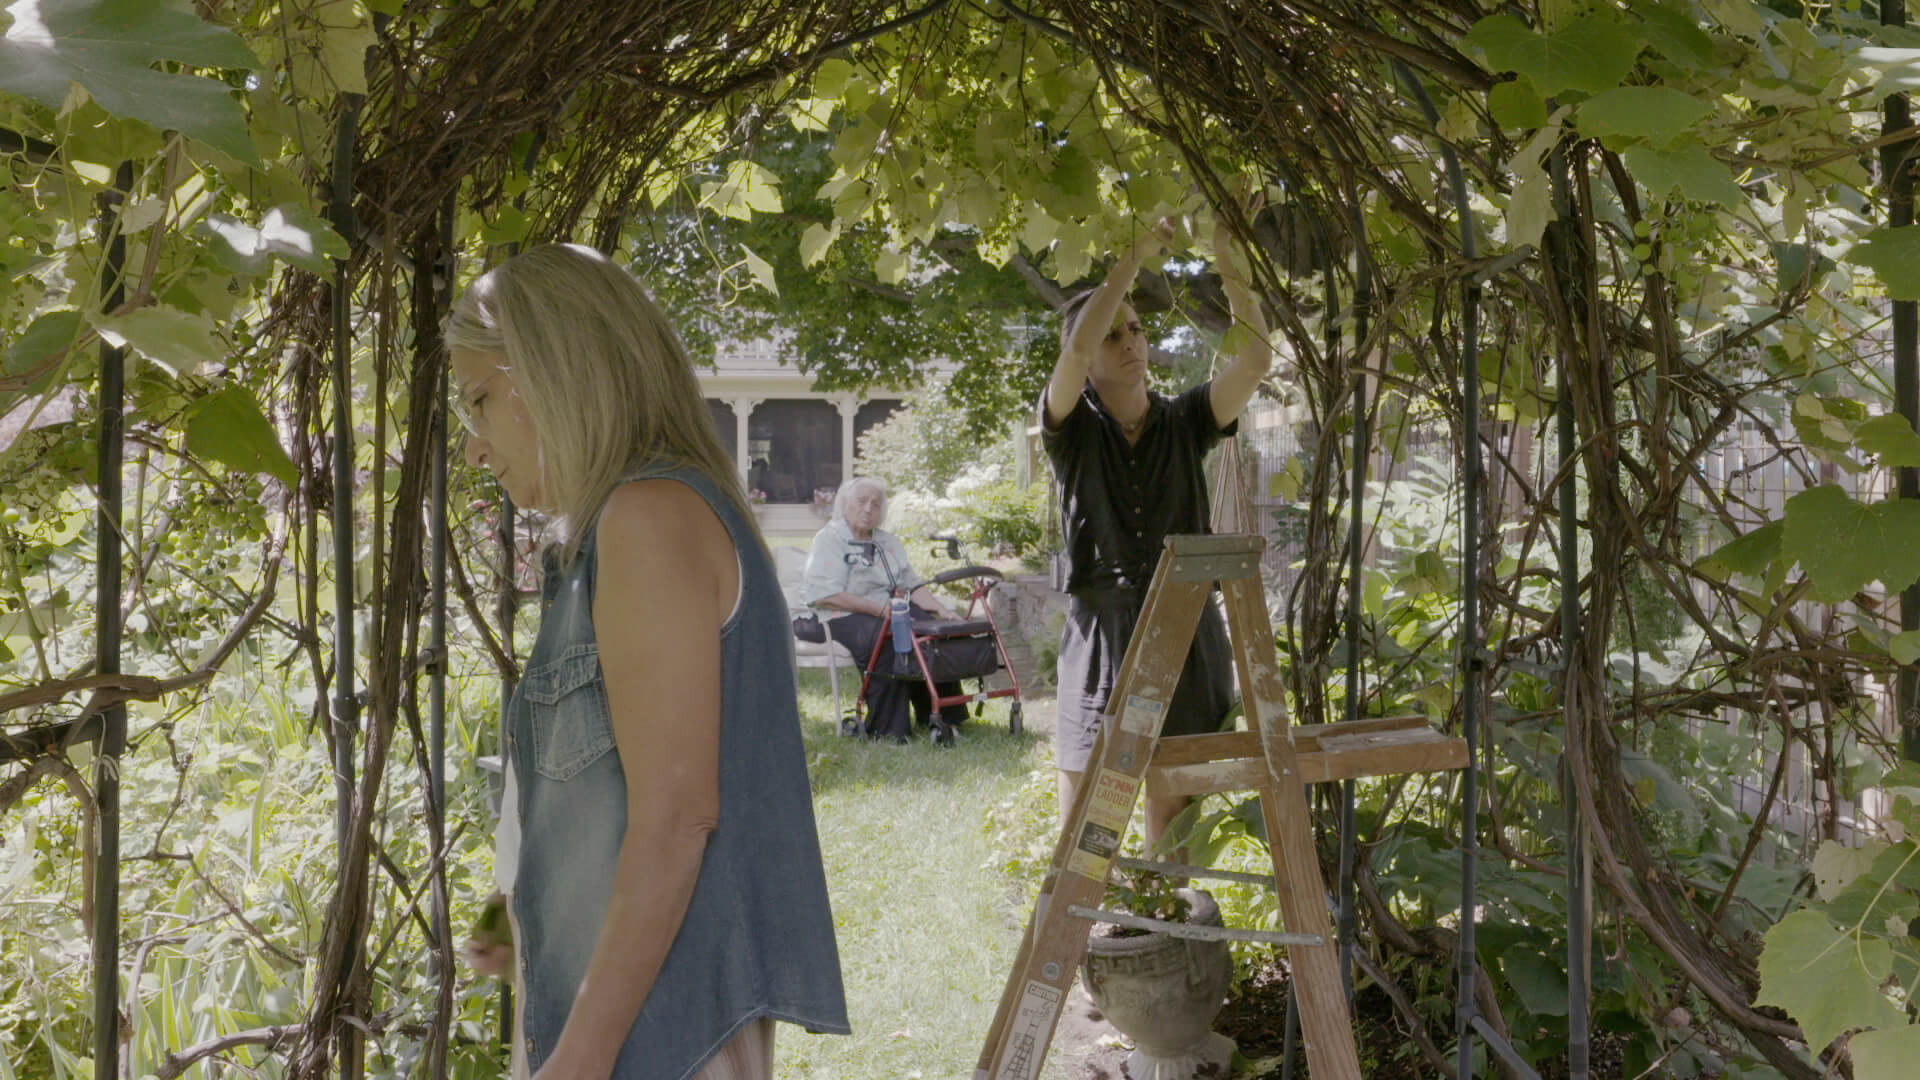 A mother and daughter stand under opposite ends of a grape arbor together, harvesting grape leaves. A grandmother is seen sitting in the background with a walker in front of her. Each woman appears to be separately lost in thought.